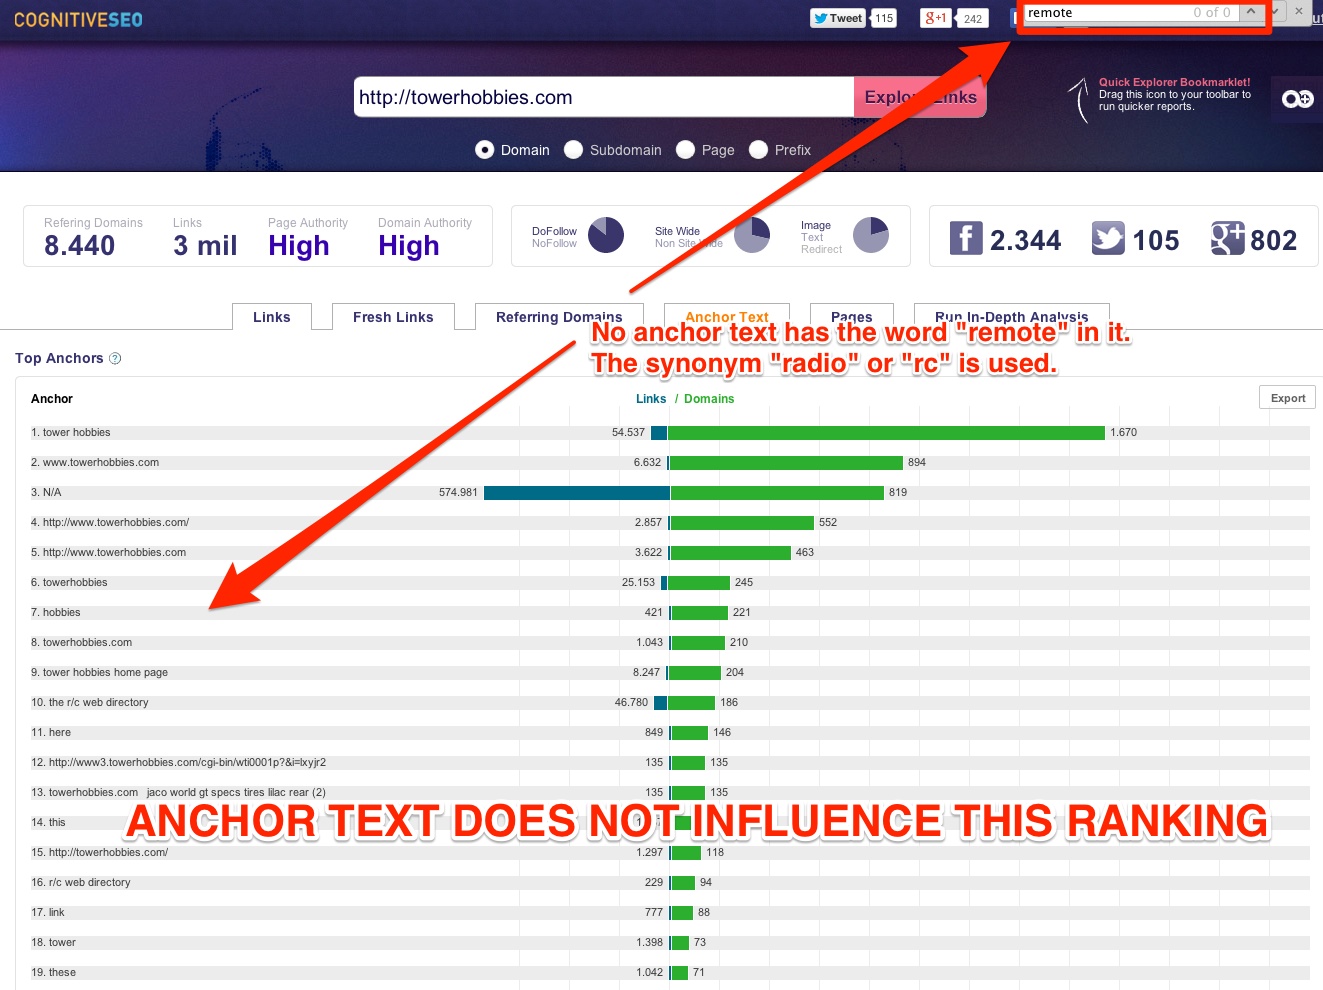 Anchor text does not influence ranking